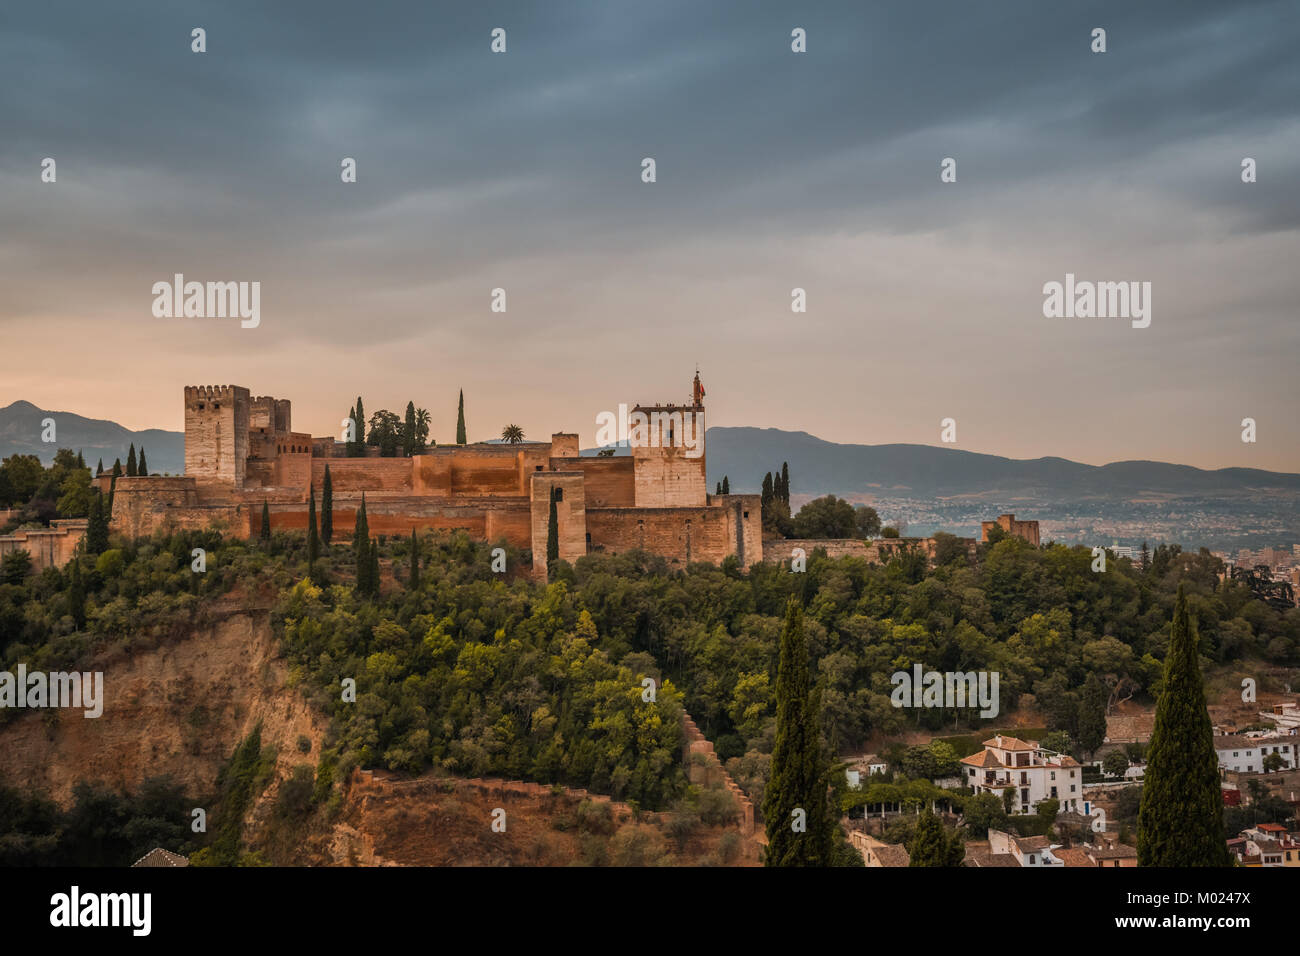 GRANADA, ANDALUSIA / SPAIN - OCTOBER 16 2017: VIEW ON ALHAMBRA FROM THE HILL Stock Photo